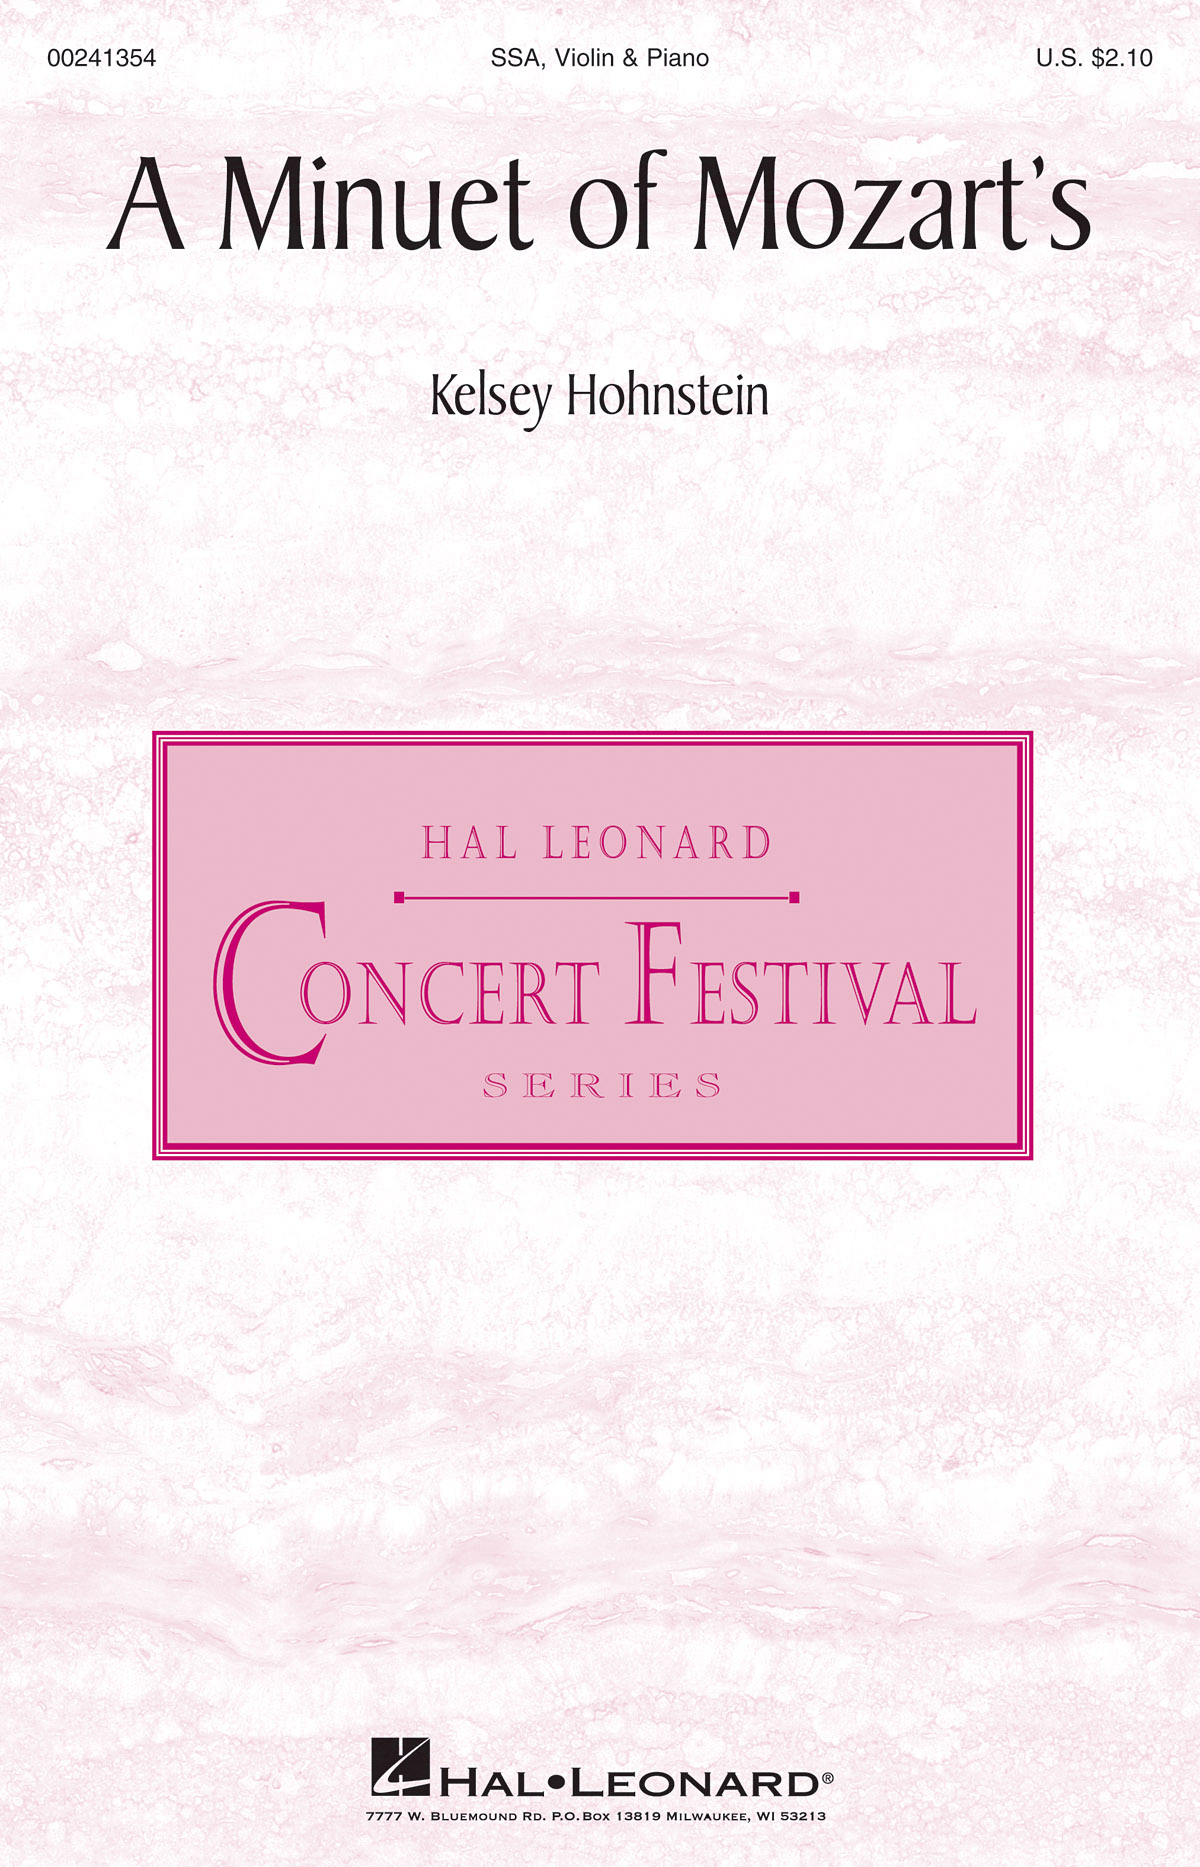 Kelsey Hohnstein: A Minuet of Mozart's: Upper Voices a Cappella: Vocal Score